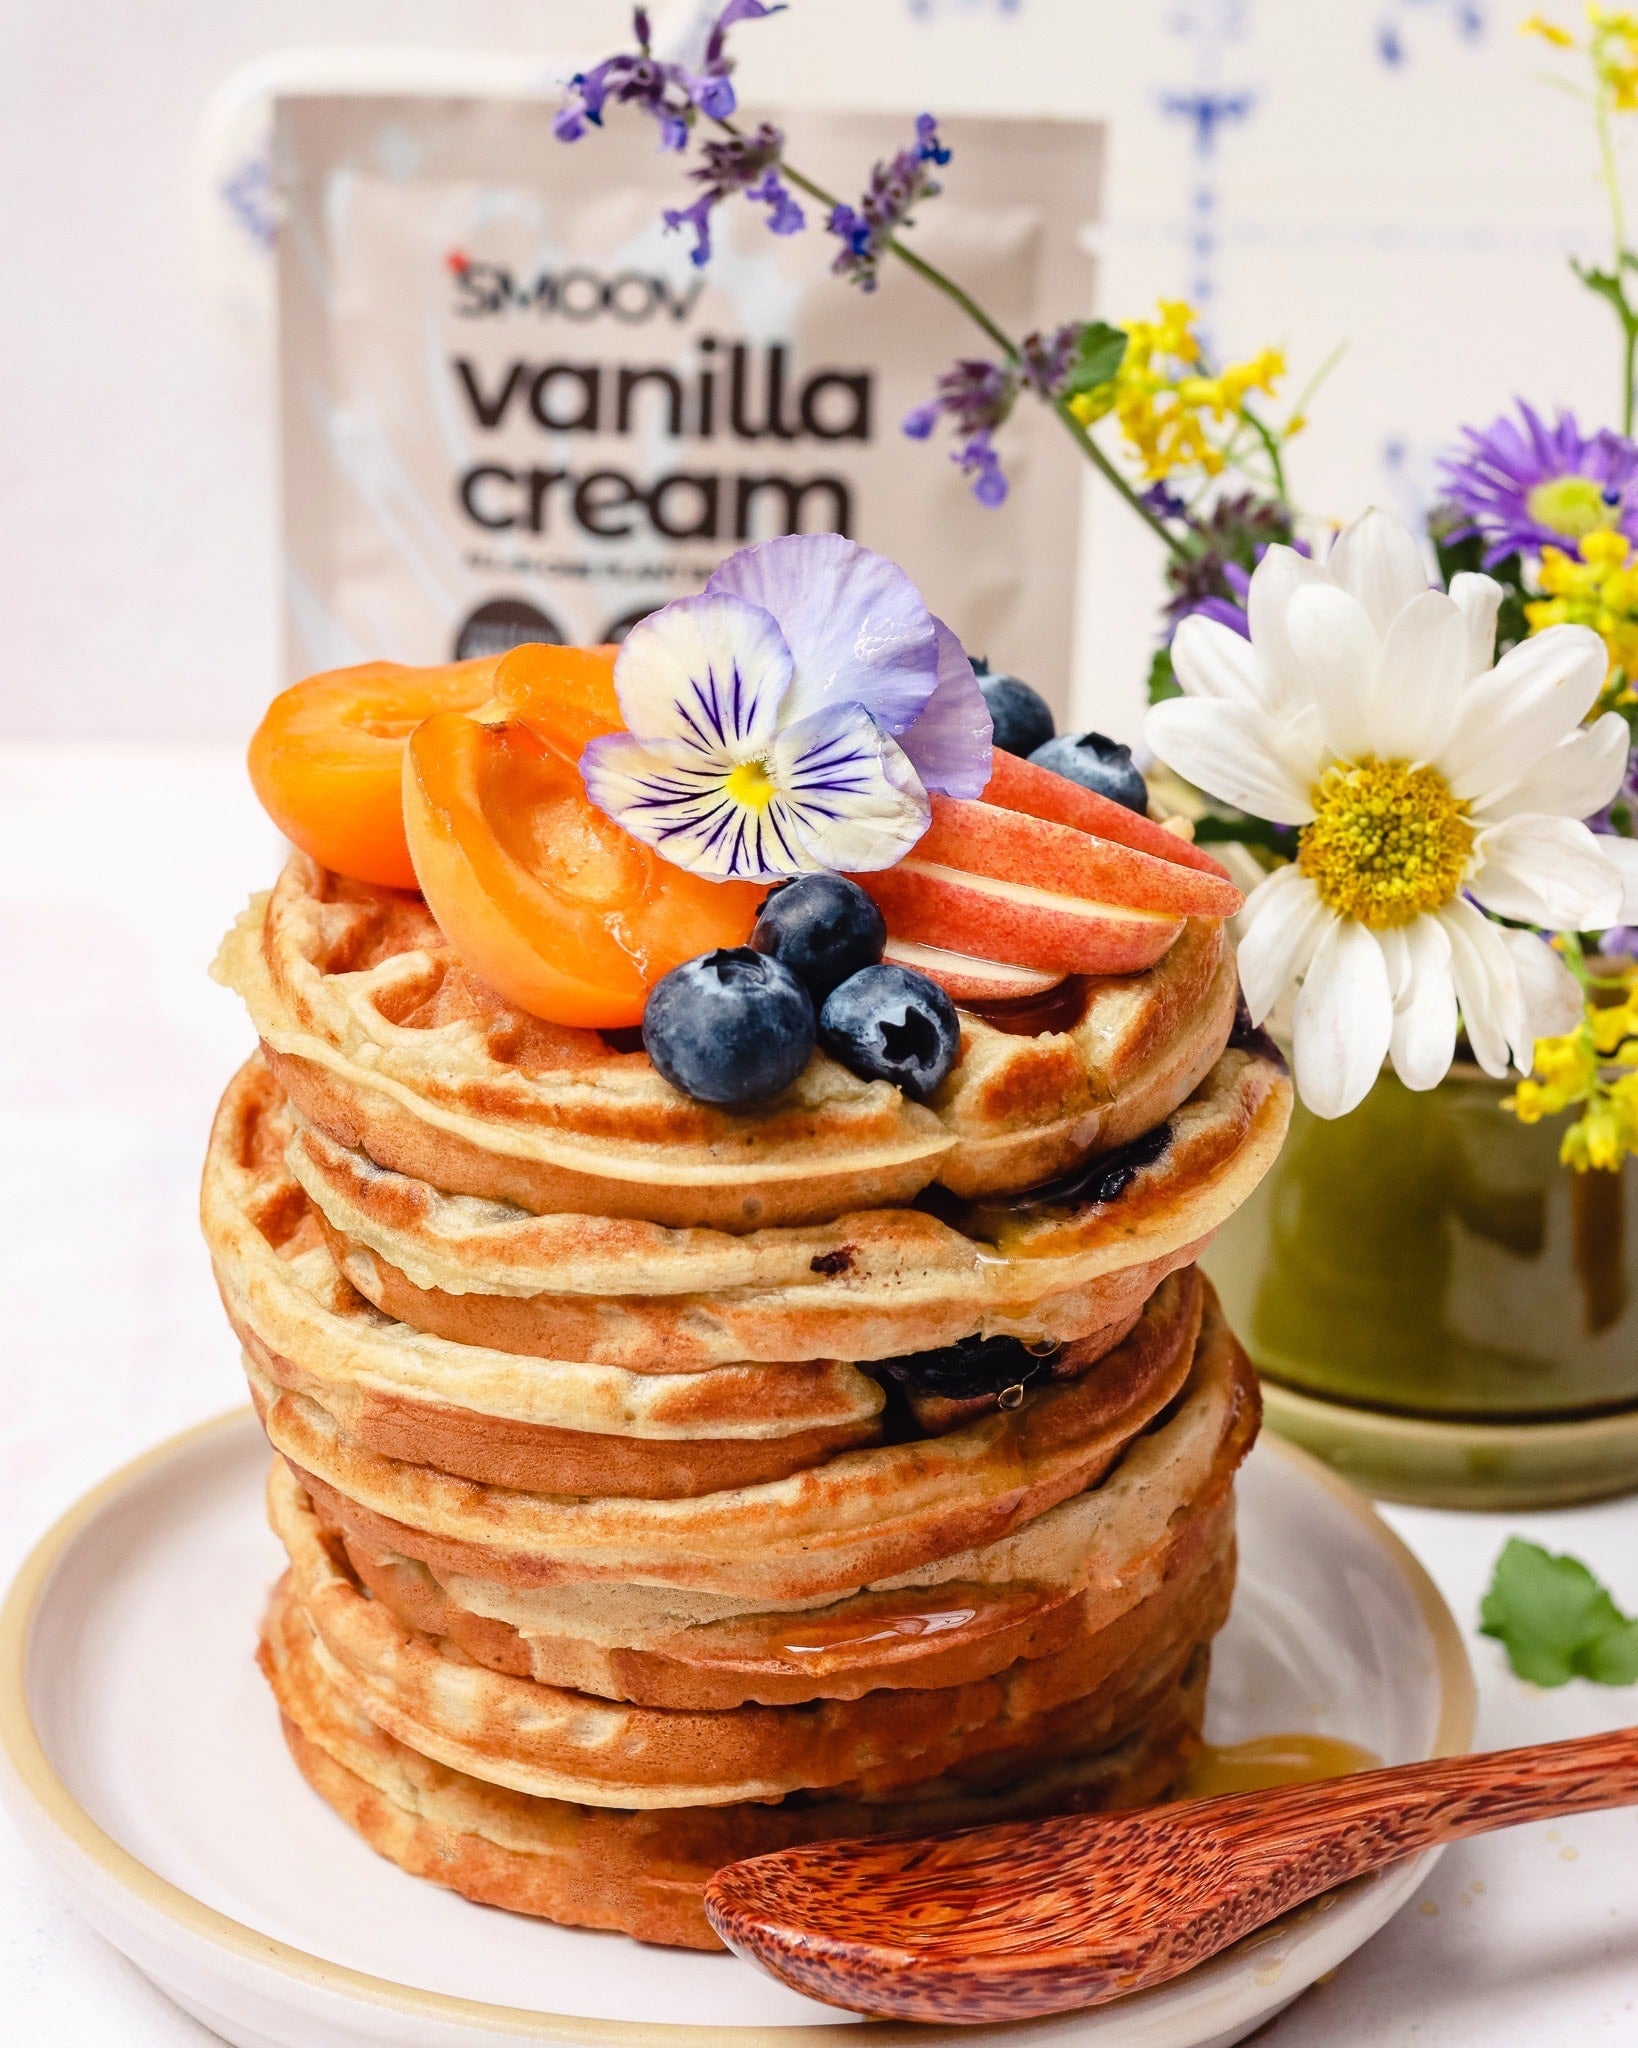 Vanilla Protein breakfast waffles made using smoov all in one vanilla protein and superfood blend